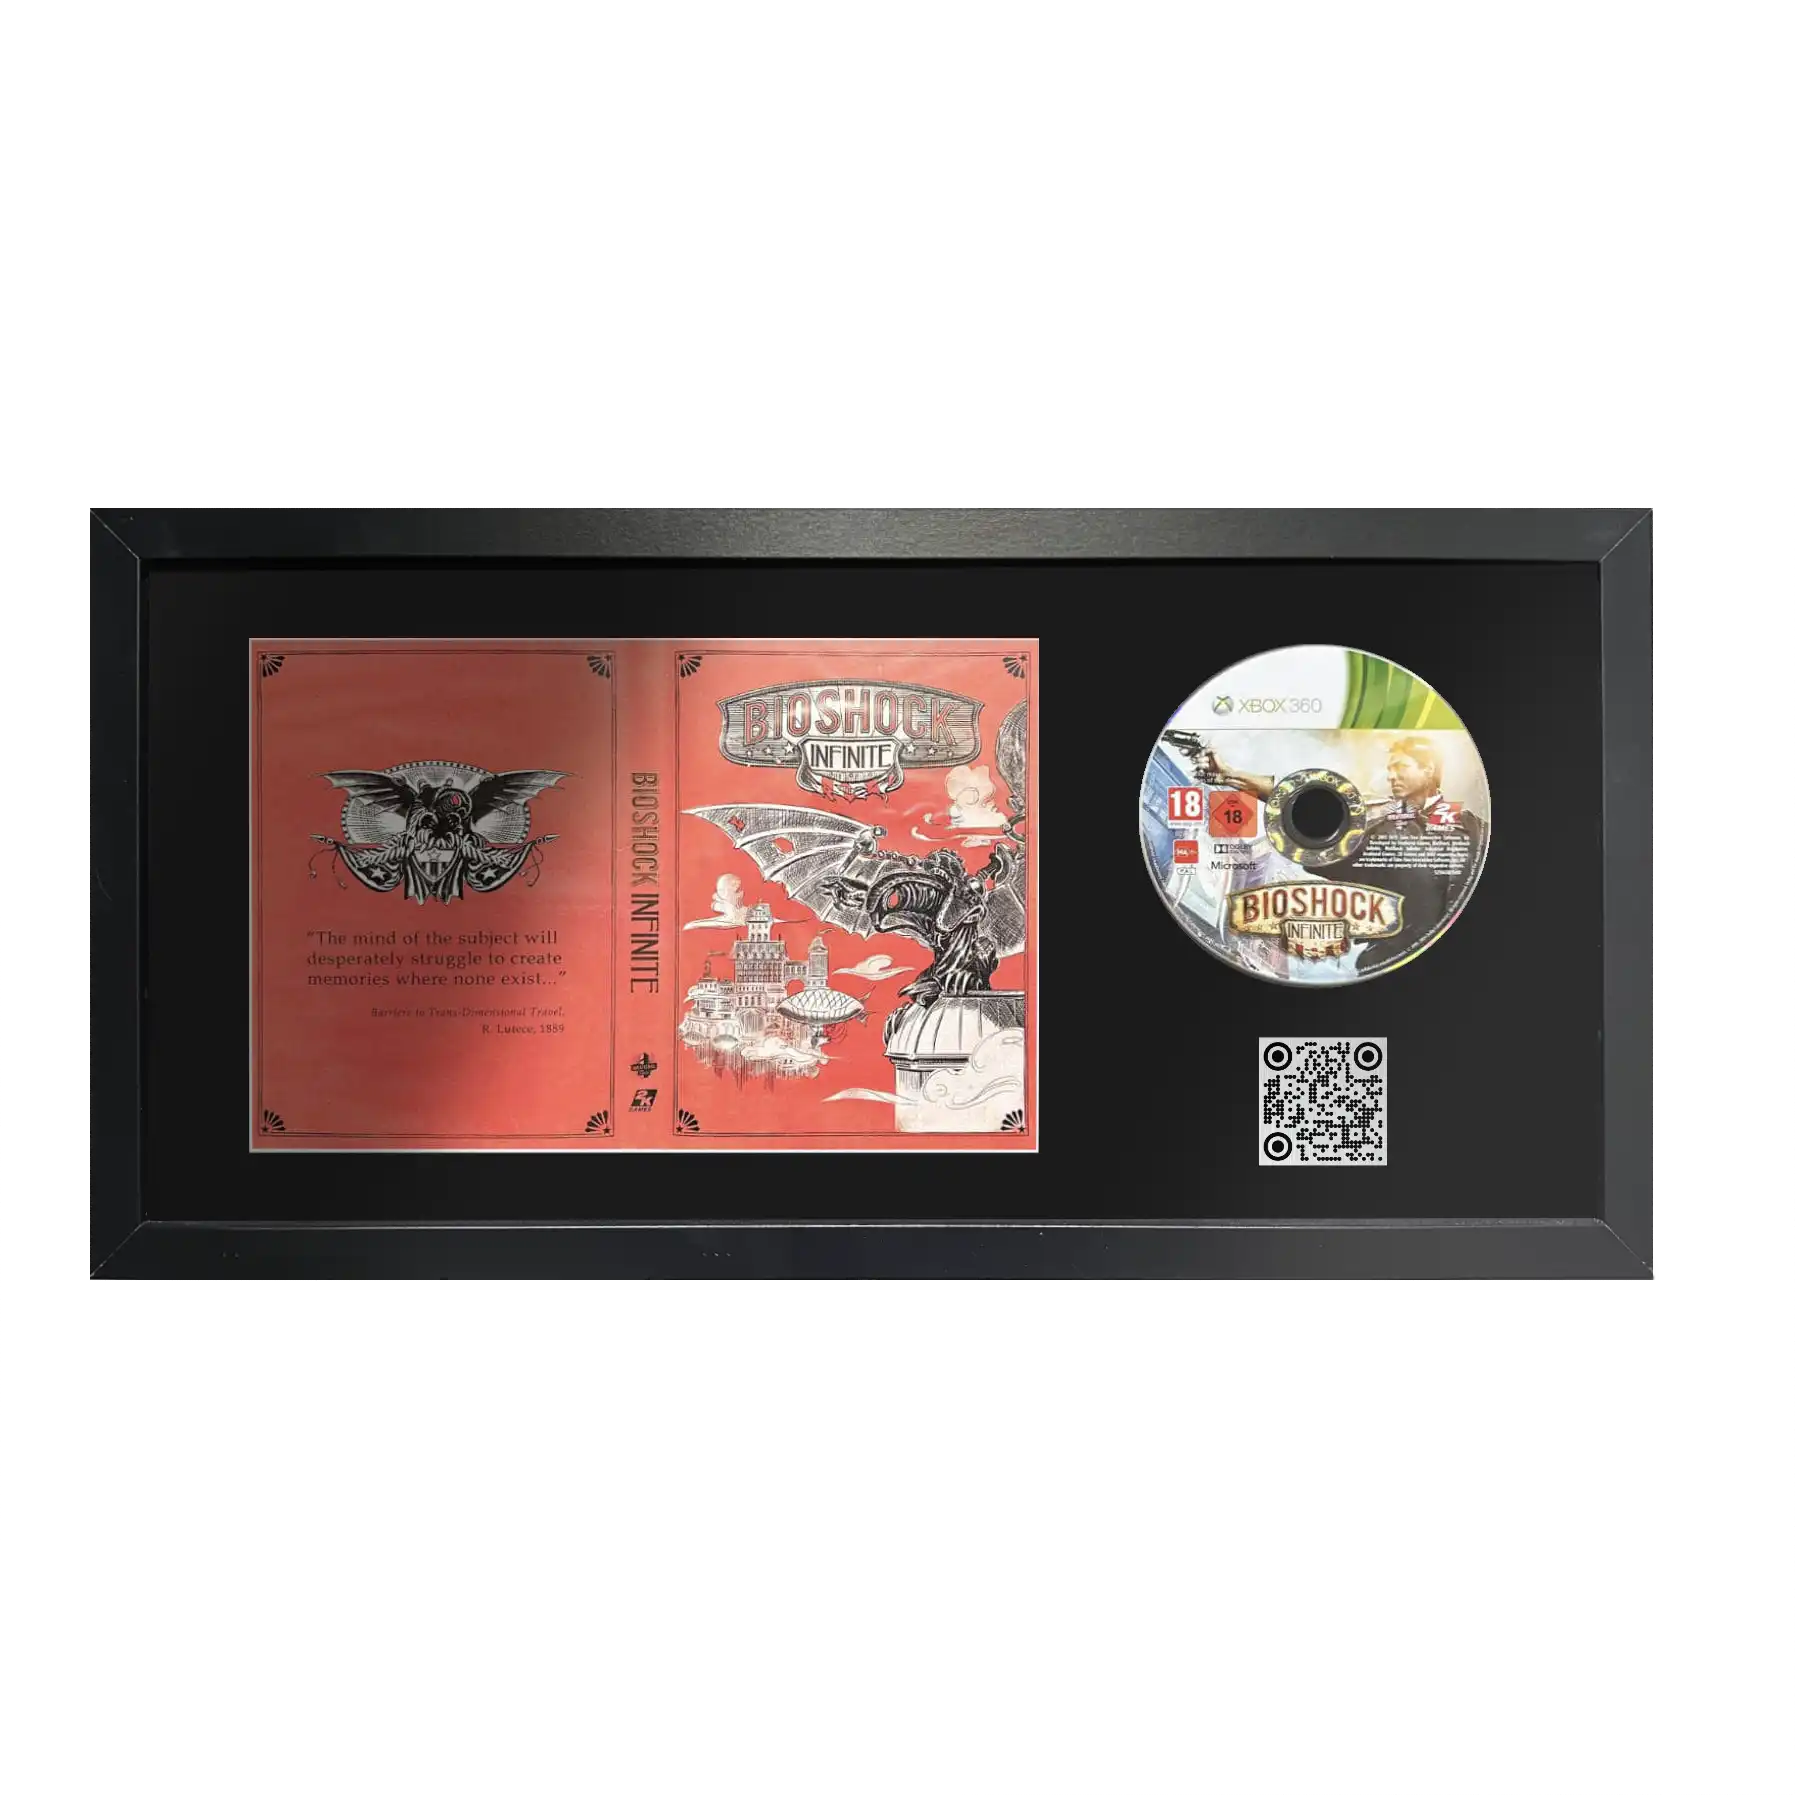 Bioshock Infinite game for Xbox 360 frame with QR code